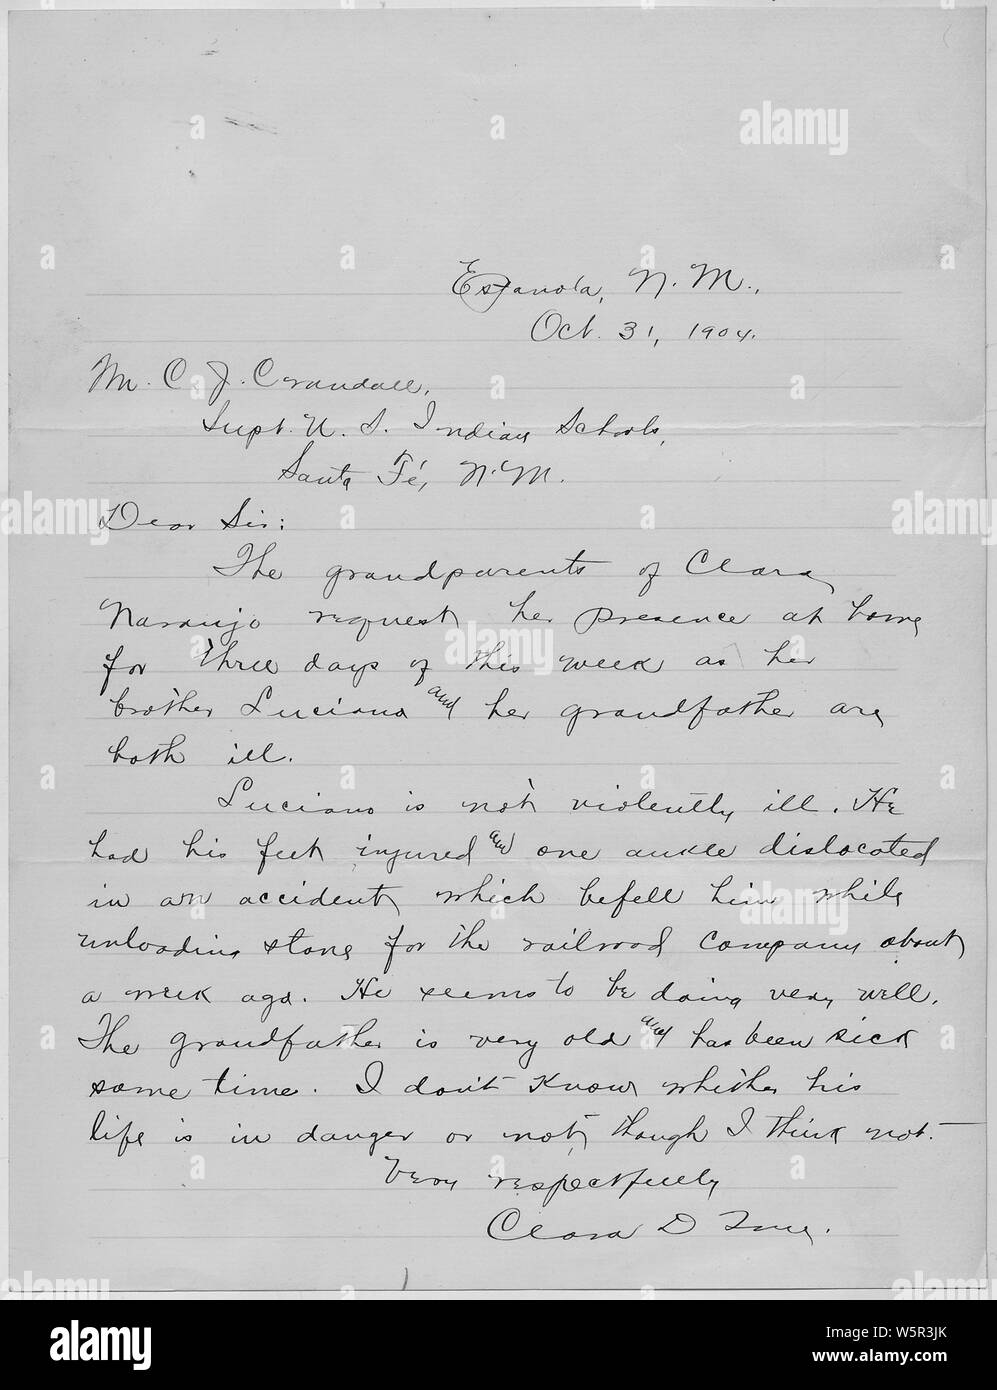 Letter to Superintendent requesting that a student at the Santa Fe Indian Boarding School be sent home.; Scope and content:  Letter to Supt. Crandall from Miss True written on behalf of the grandparents of Clara Naranjo, who is a student at the Santa Fe Indian Boarding School. The grandparents were ill and her brother was injured and they wanted her to come home to help them. Stock Photo